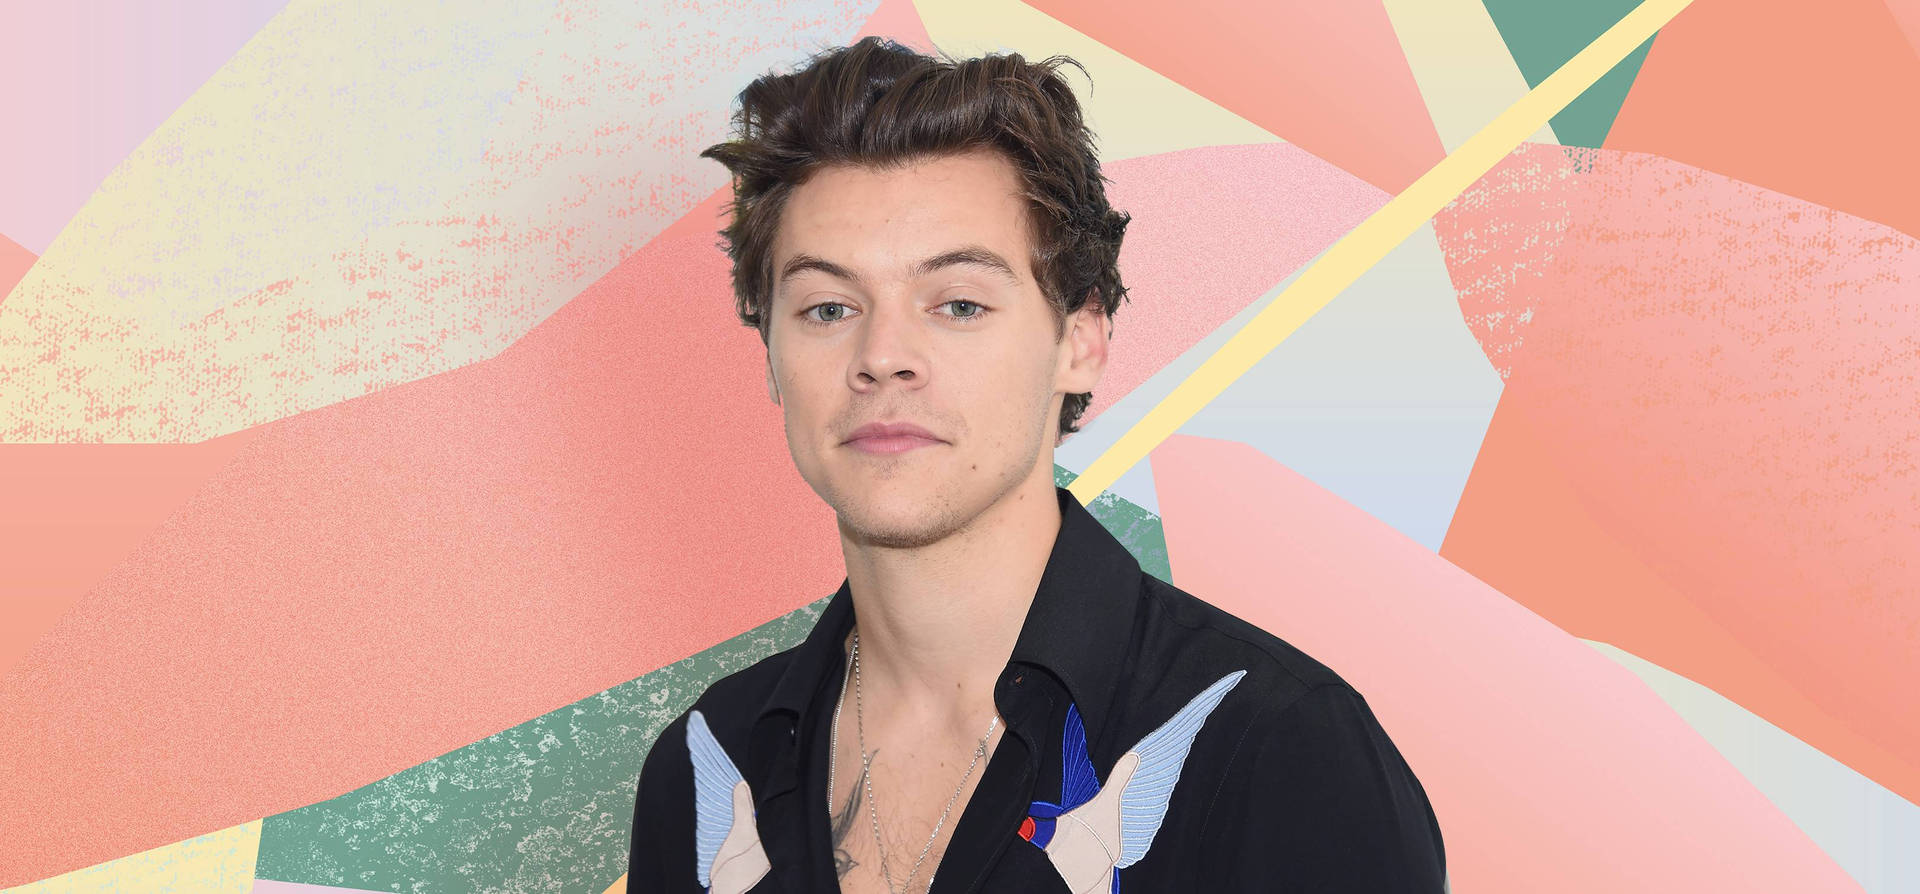 Harry Styles Wallpaper Images